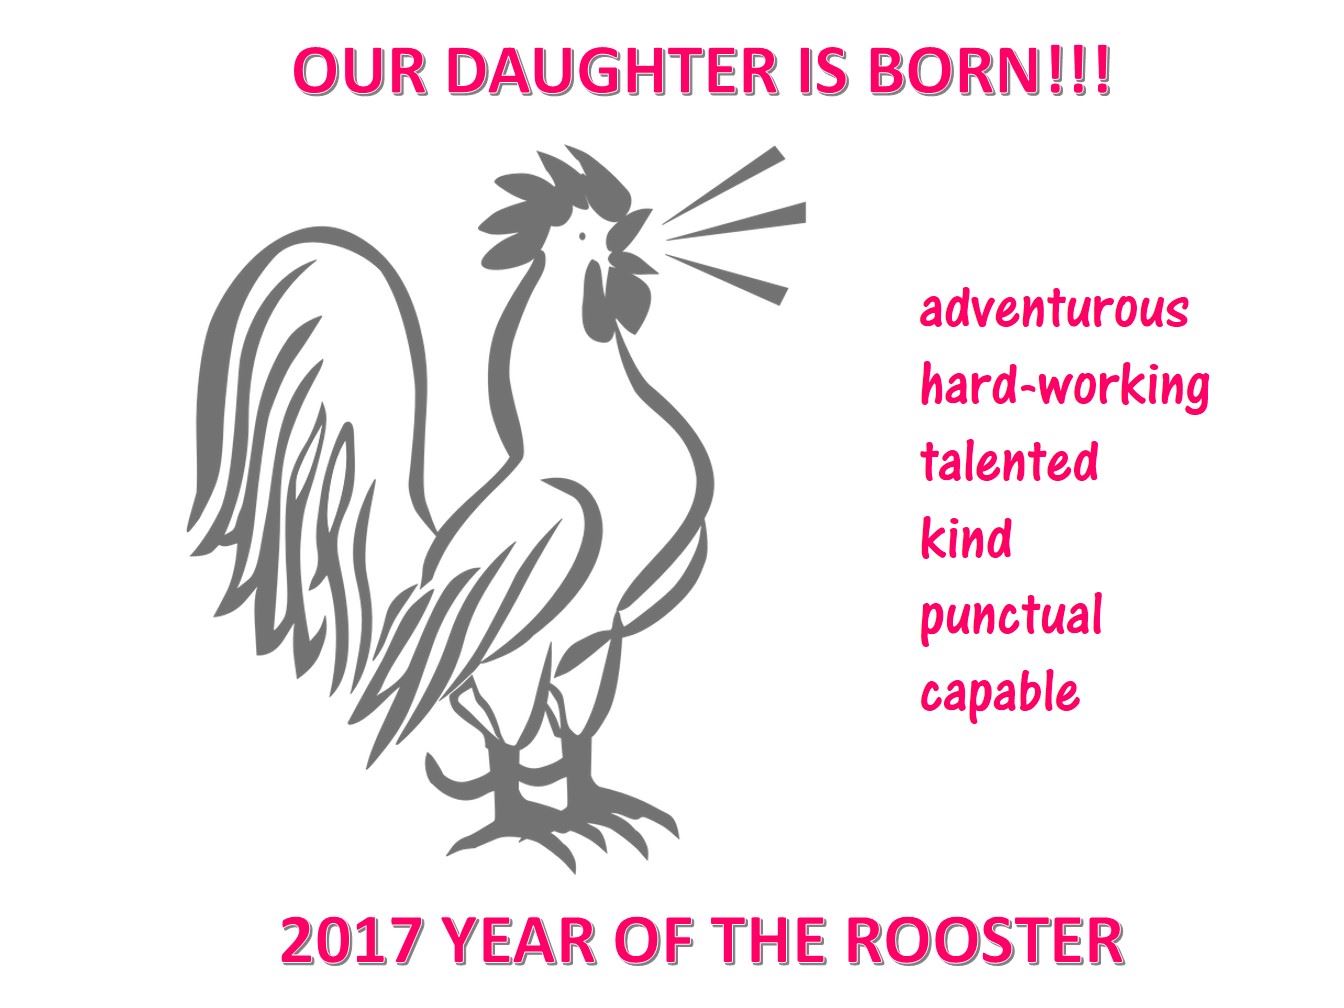 Daughter born Chinese year of rooster poster 模板